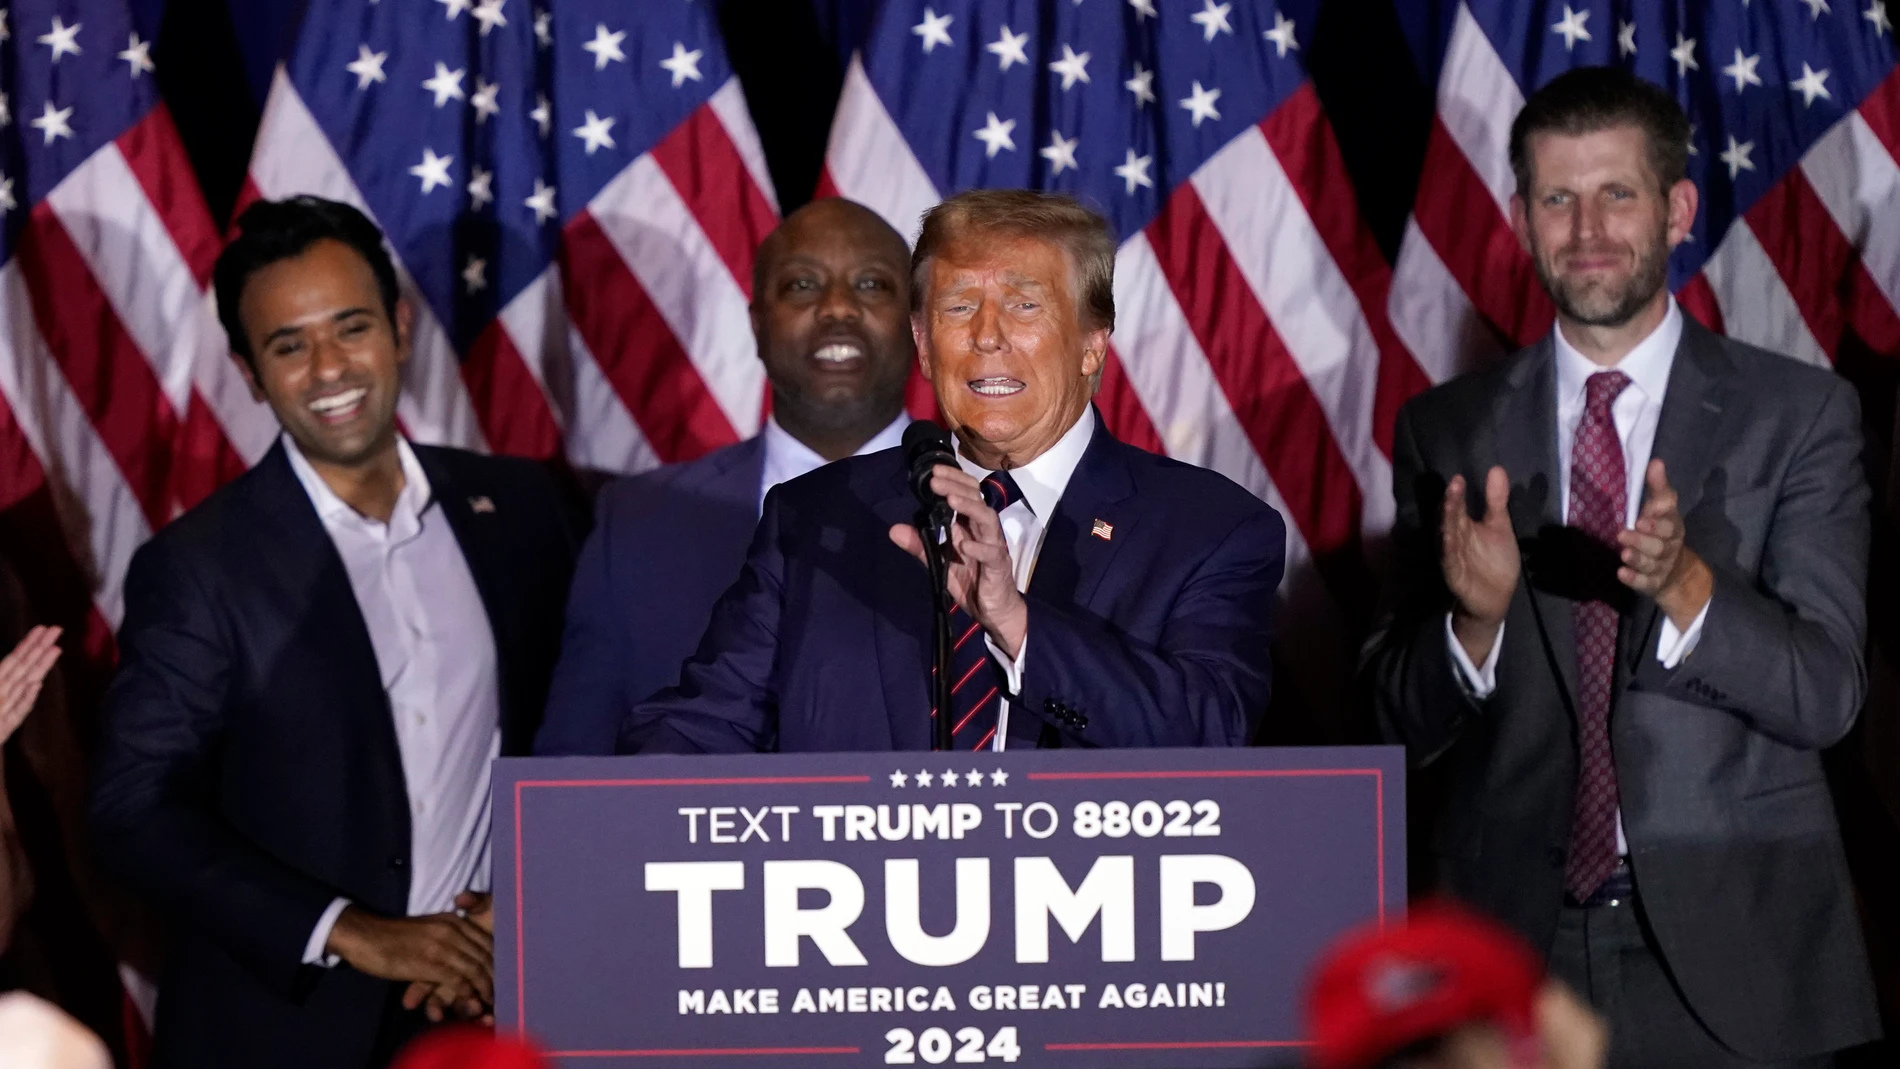 Republican presidential candidate former President Donald Trump speaks at a primary election night party in Nashua, N.H., Tuesday, Jan. 23, 2024, as Vivek Ramaswamy, Sen. Tim Scott, R-S.C., and Eric Trump laugh. (AP Photo/Pablo Martinez Monsivais)